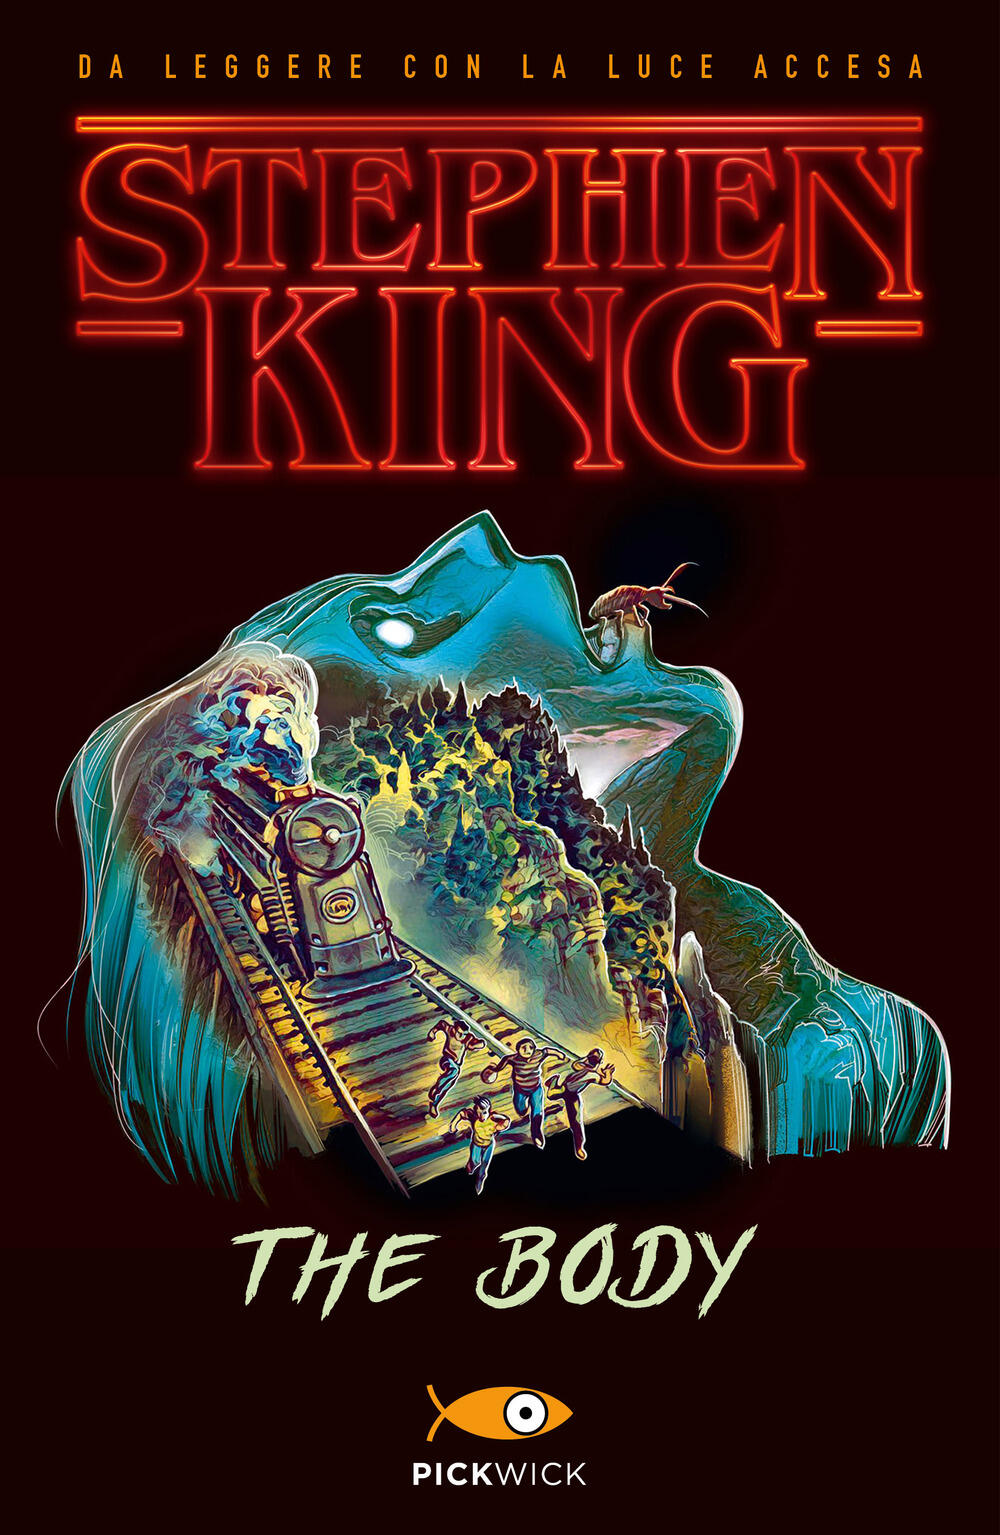 book review the body stephen king